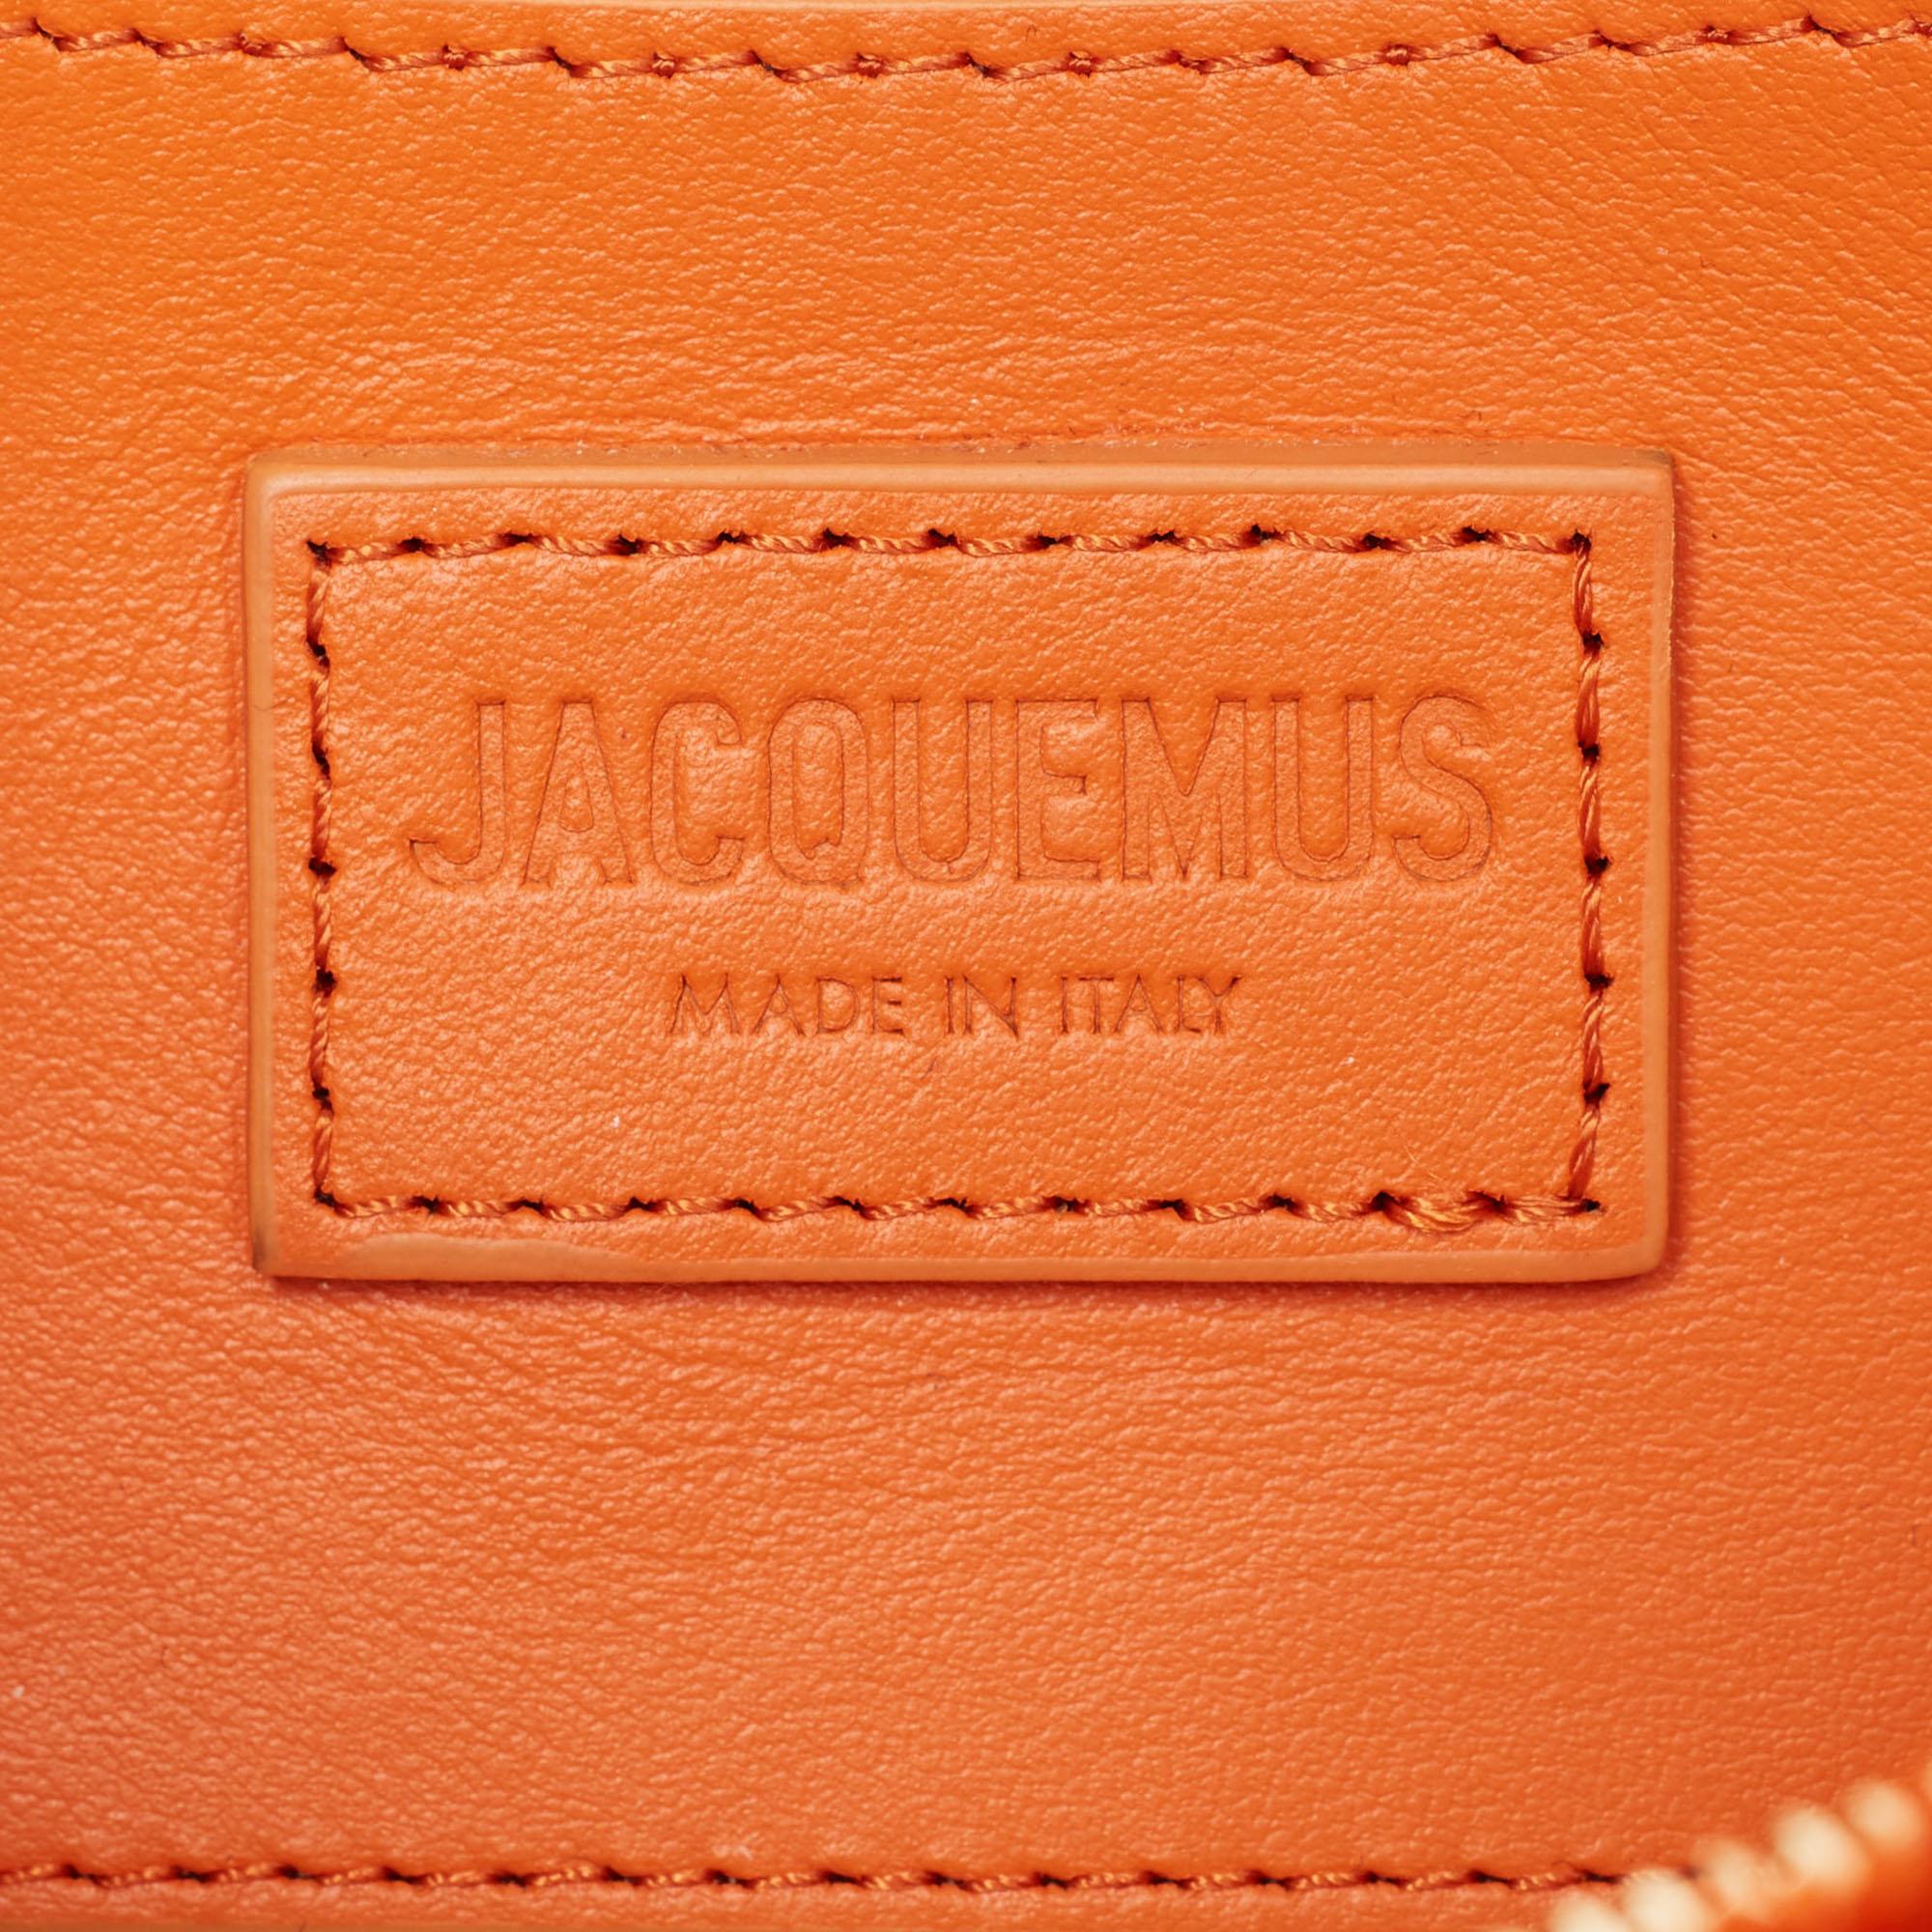 Jacquemus Orange Calf Hair and Leather Le Bisou Baguette Bag For Sale 6